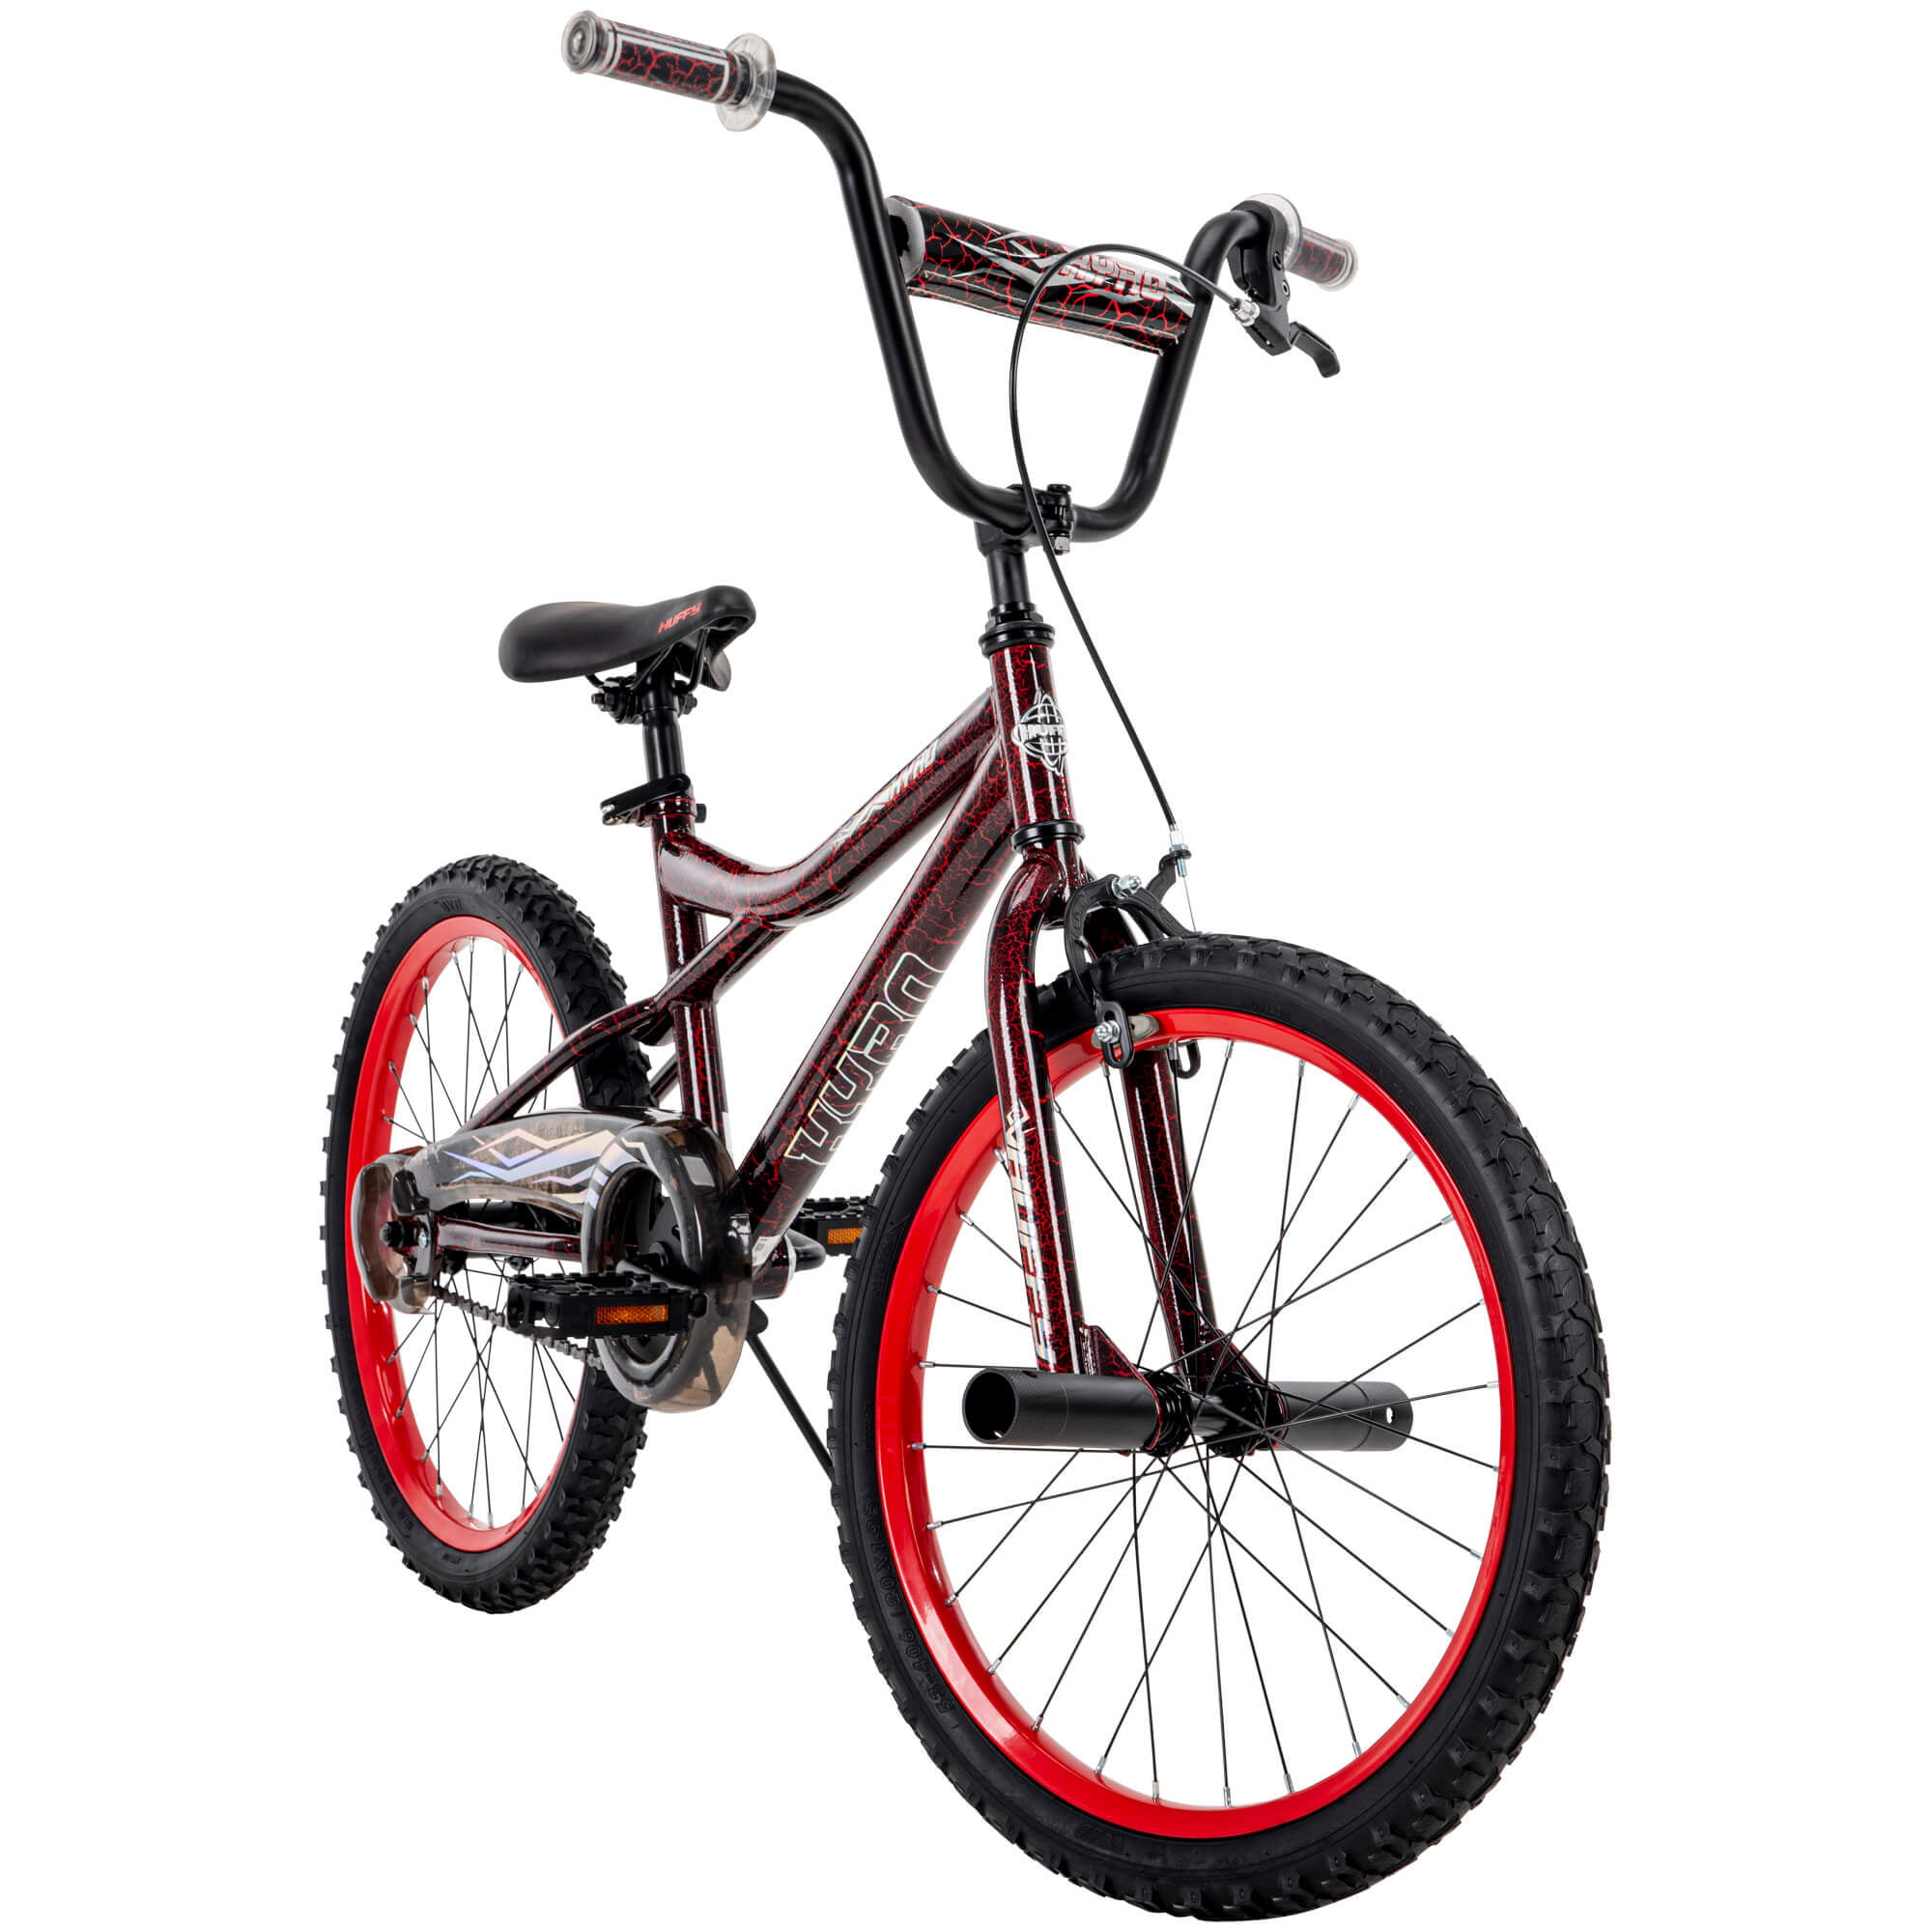 Details about   20" Kyro BMX Bike Sturdy Frame w/ Cool Graphics Ages 8-12 Red Height 4'2"+ 